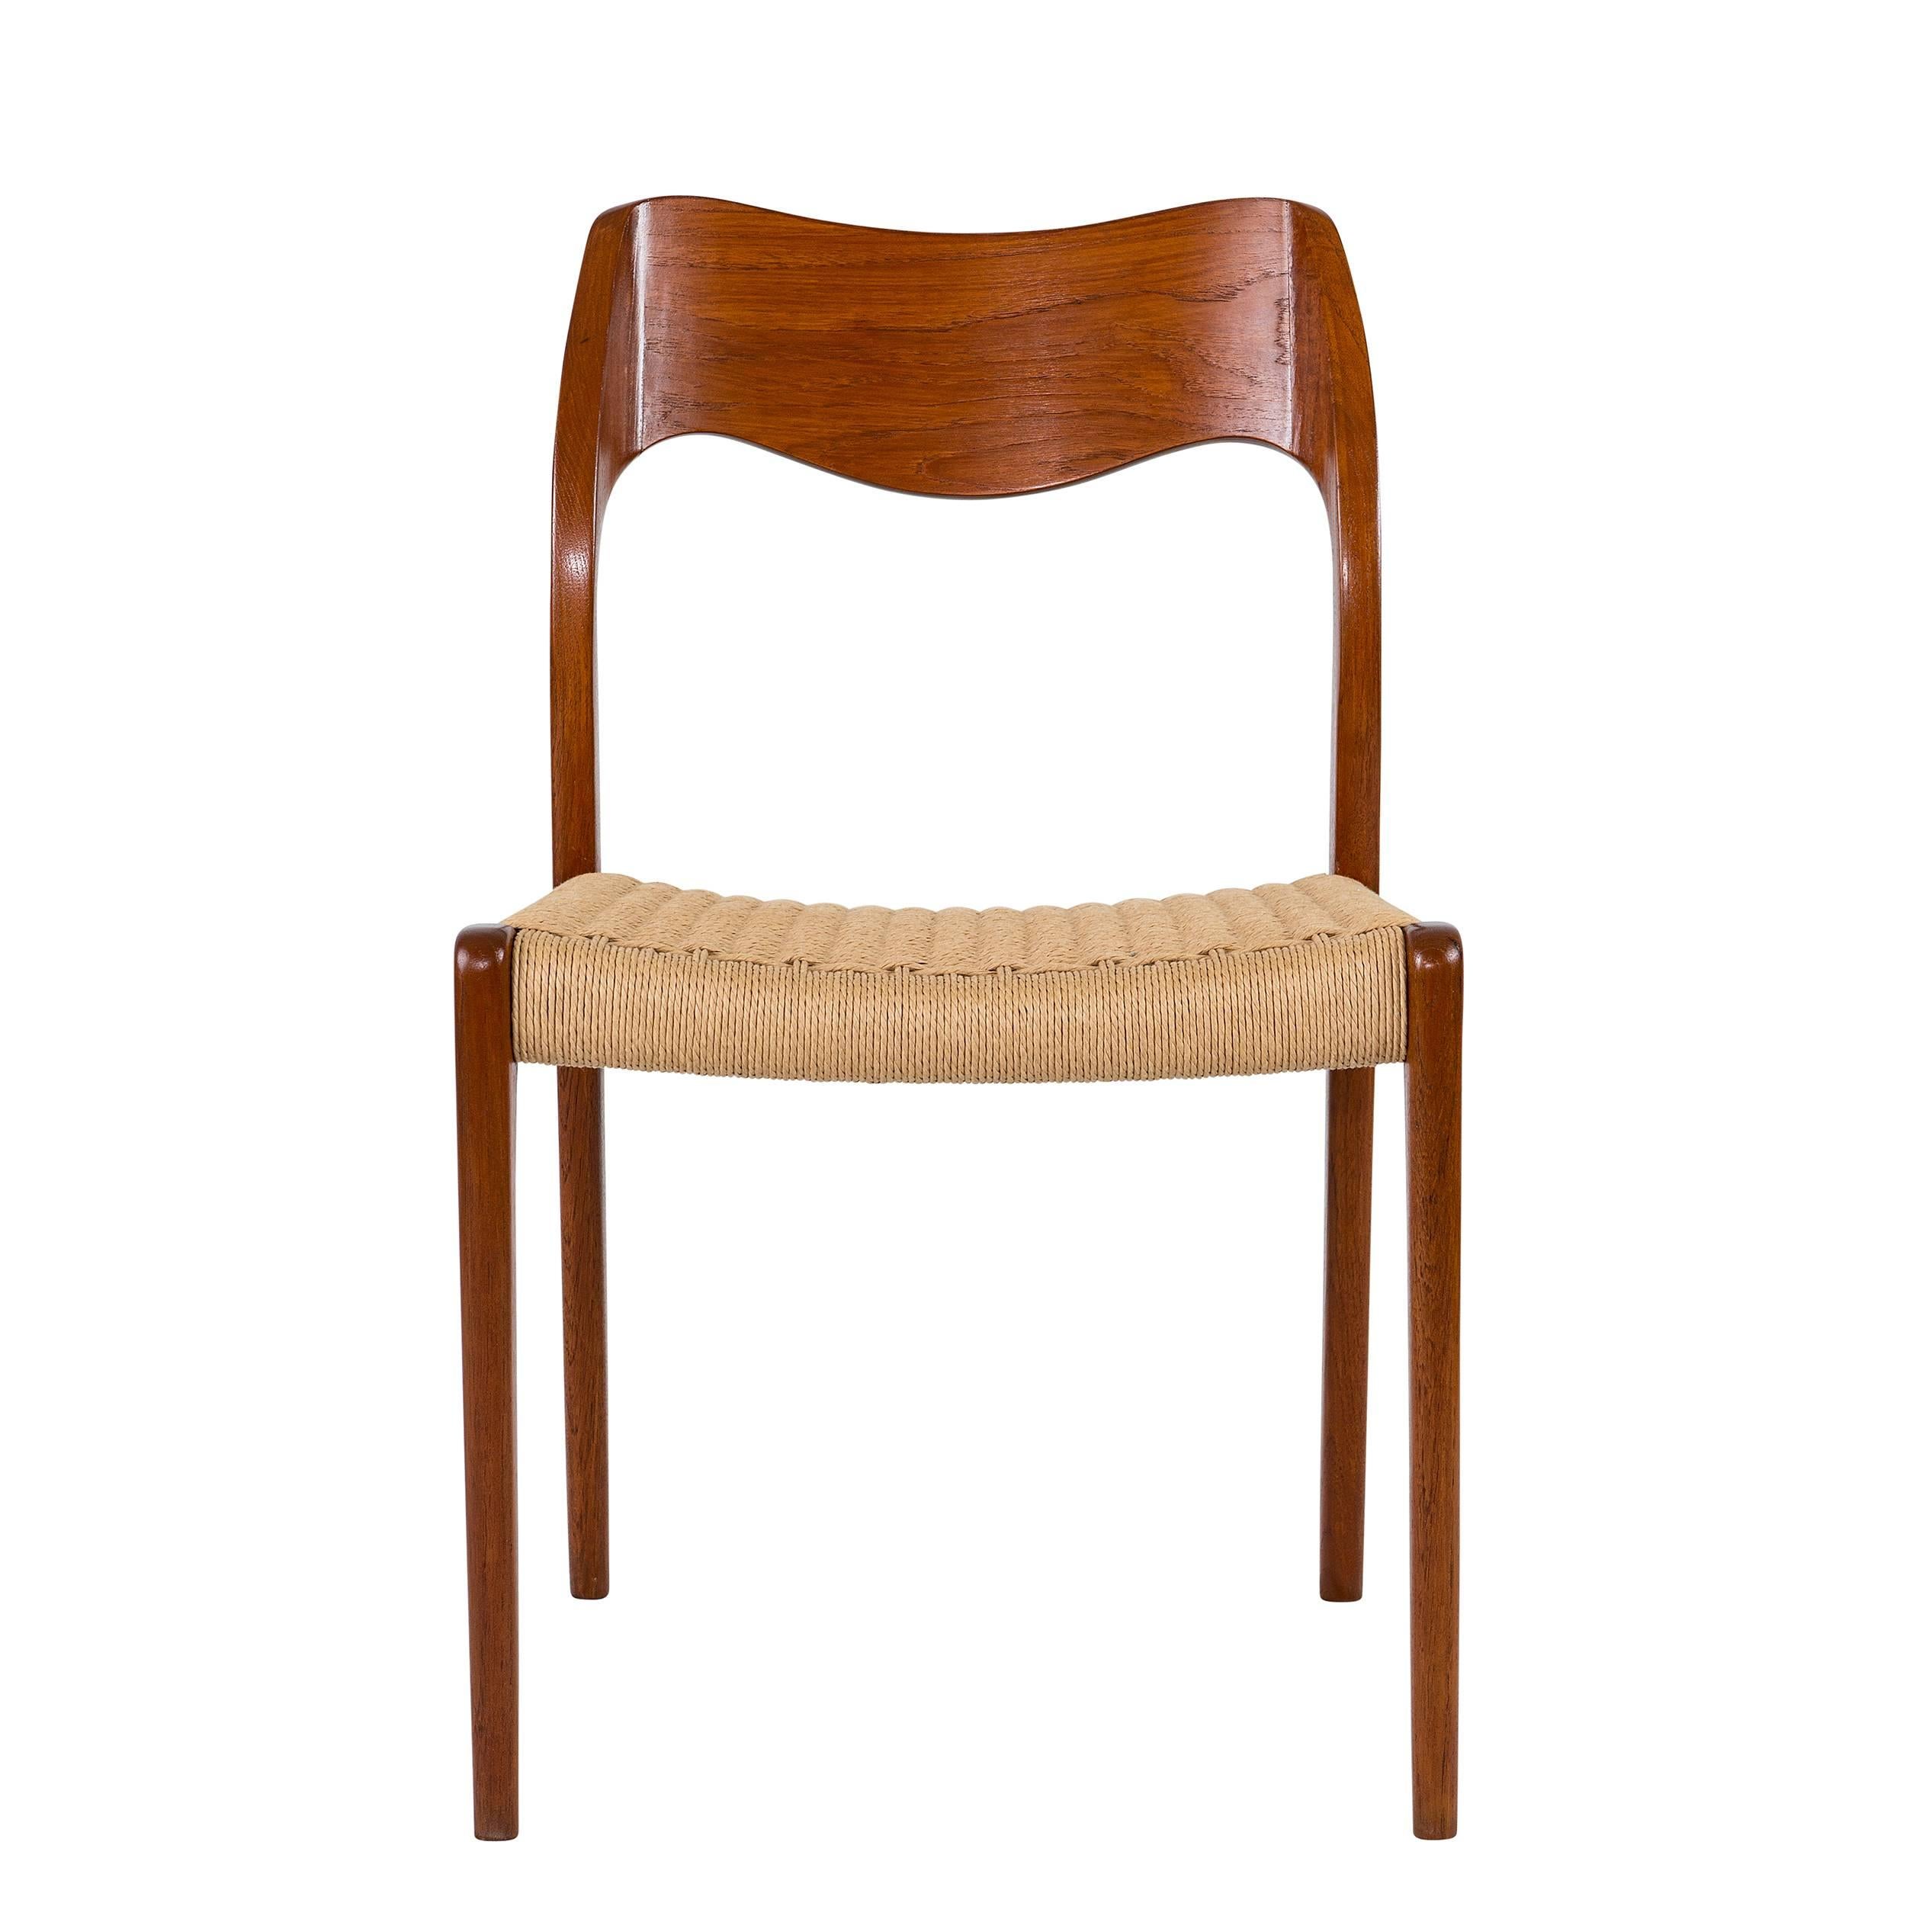 Set of eight teak Niels Moller #71 dining chairs designed in 1951 and produced by J. L. Moller Mobelfabrik.